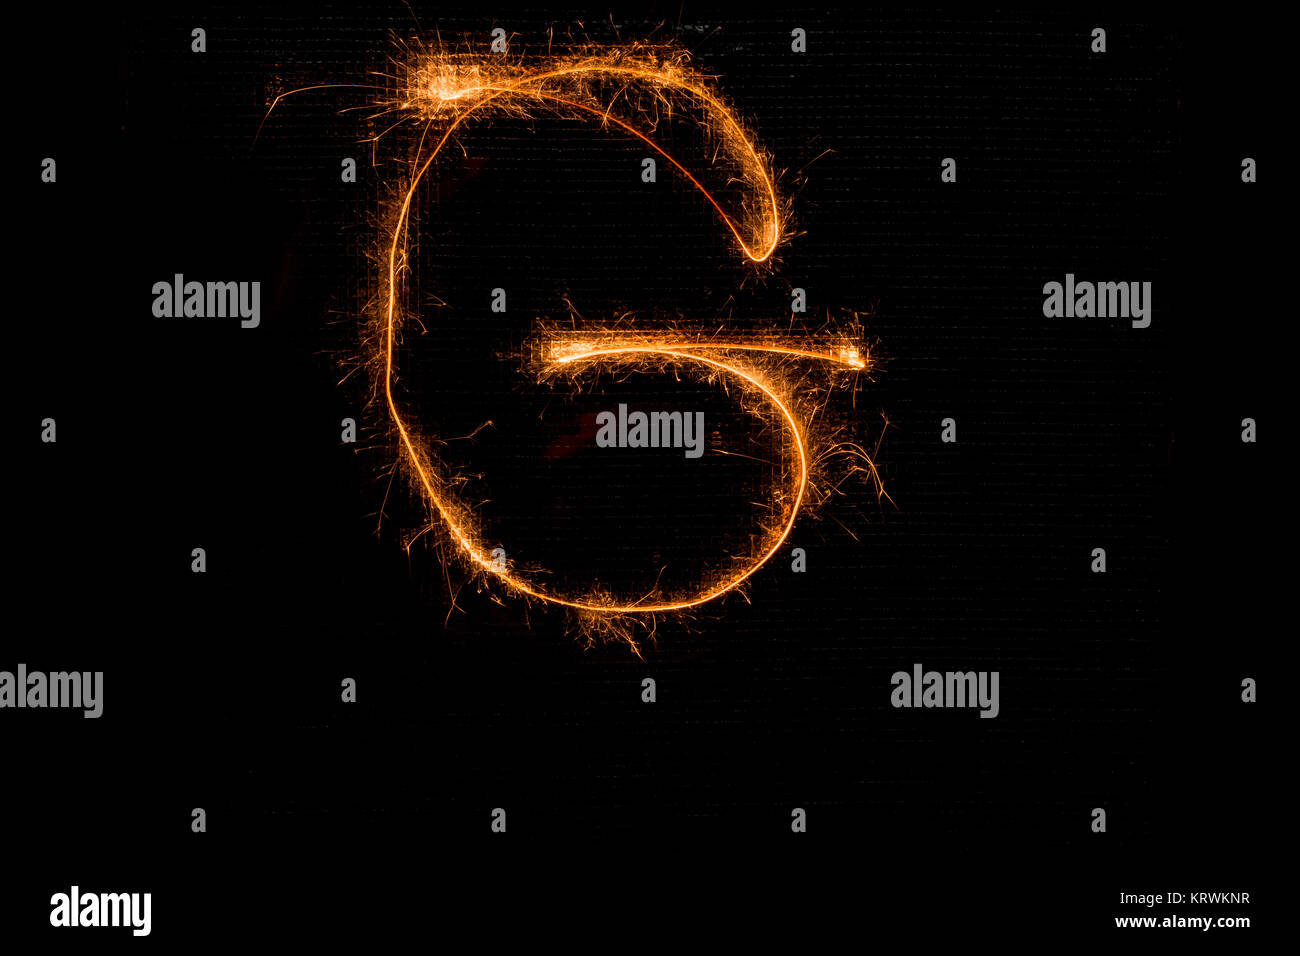 Letter G made of sparklers on black Stock Photo